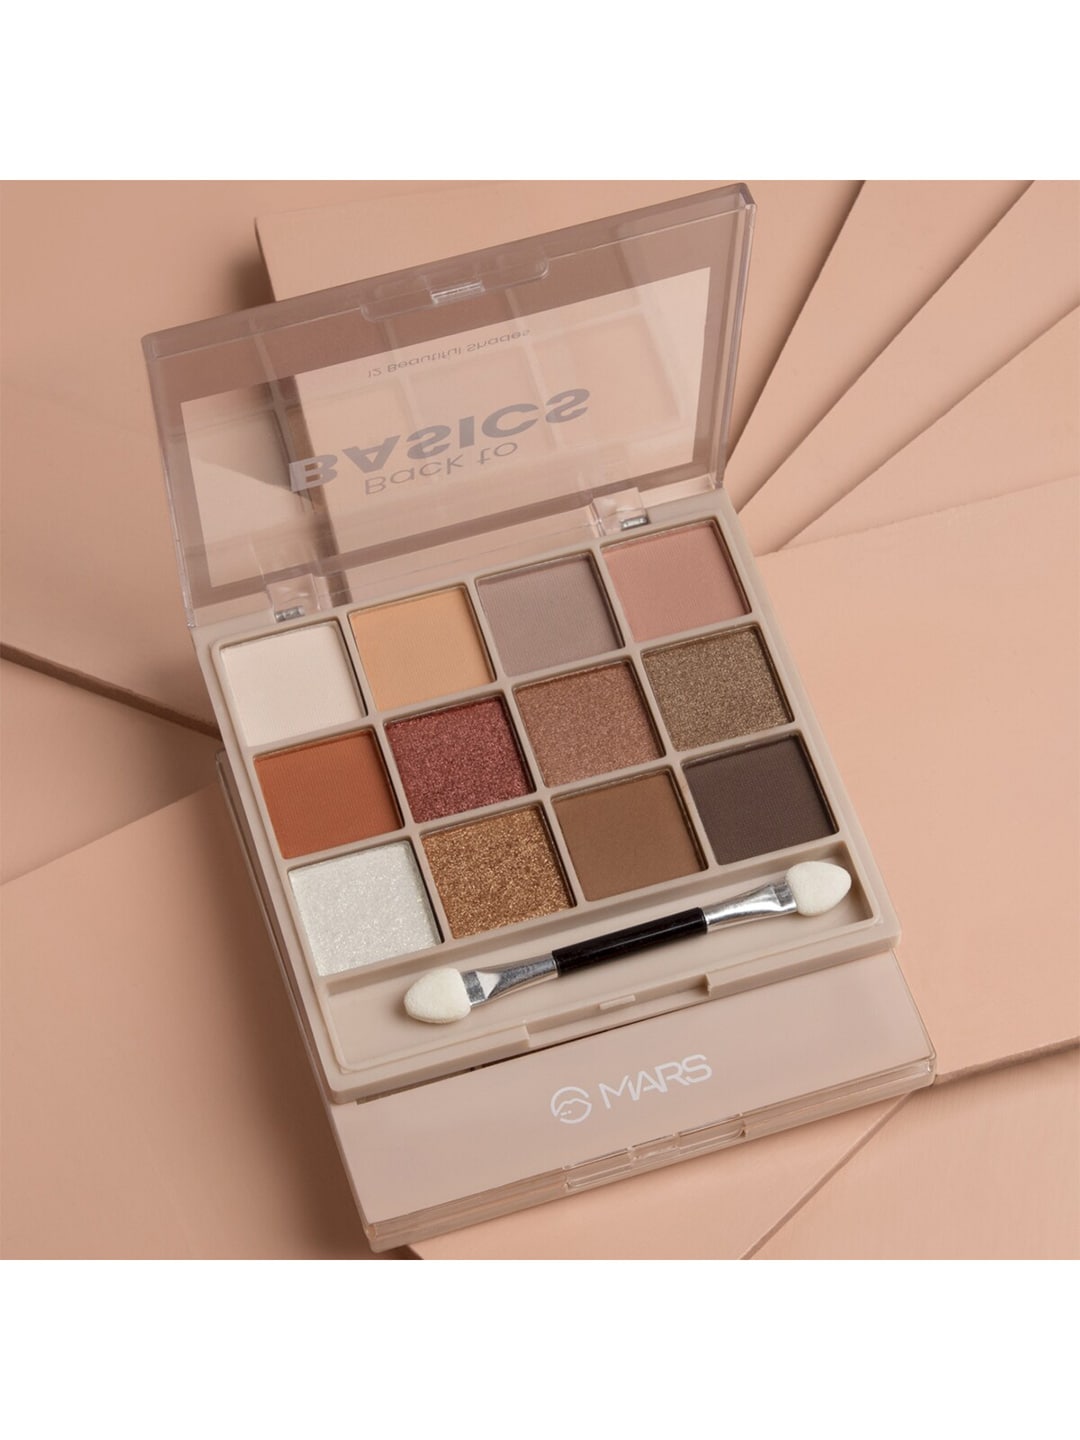 MARS Back to Basics Eyeshadow Palette Shade-02 Price in India